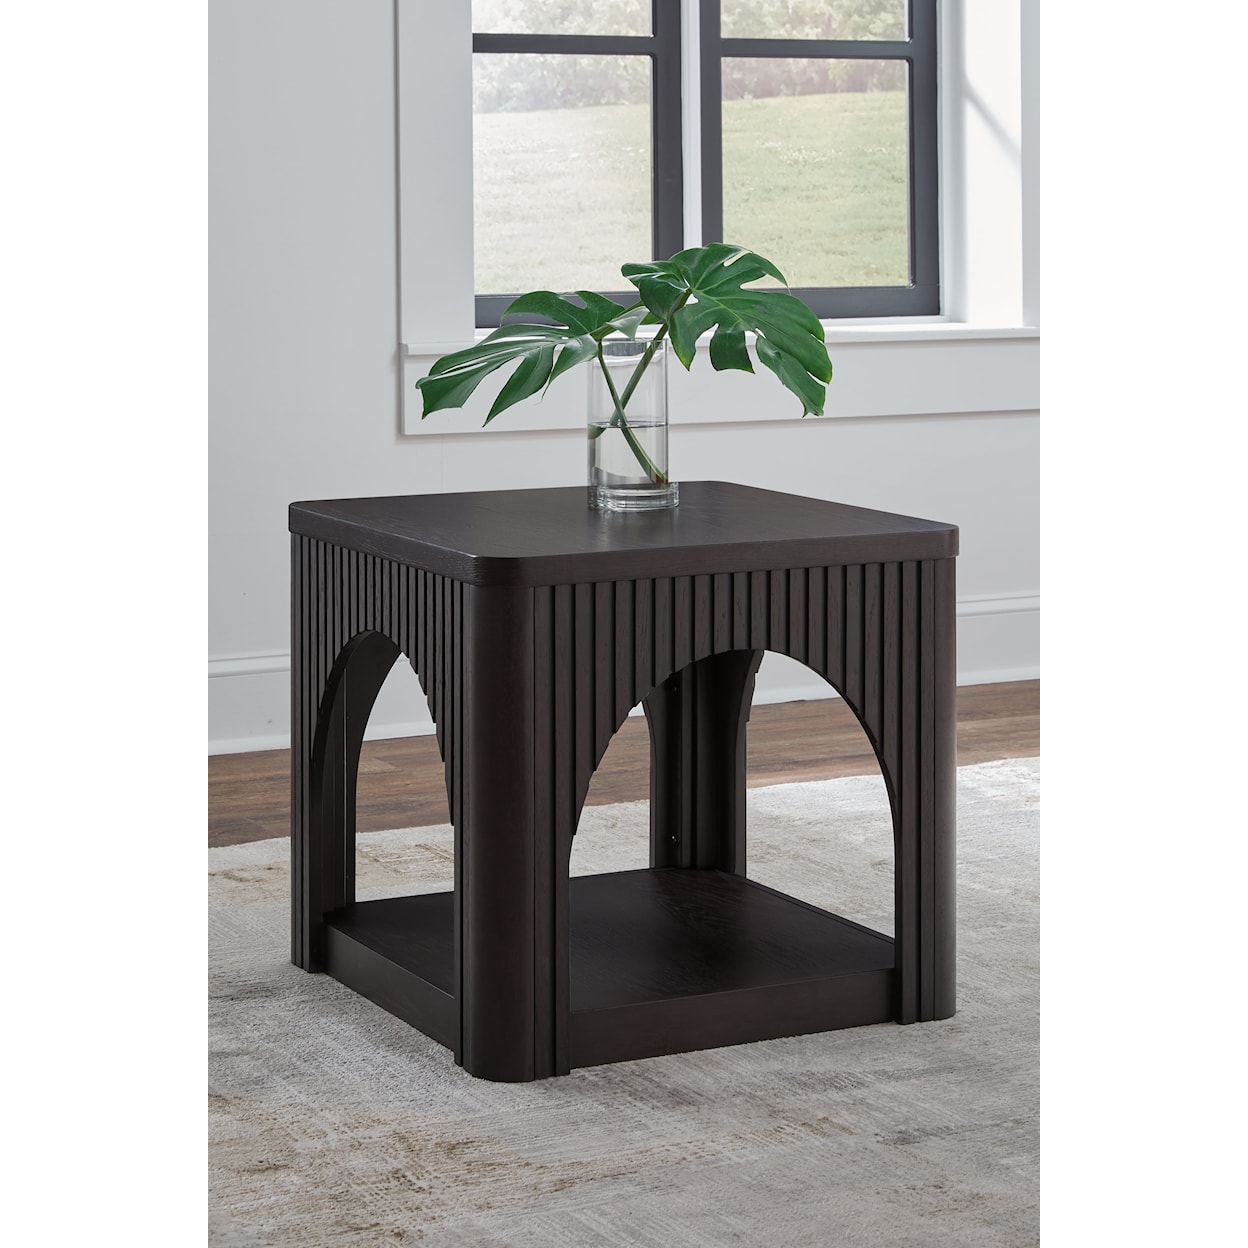 Benchcraft Yellink Coffee Table and 2 End Tables